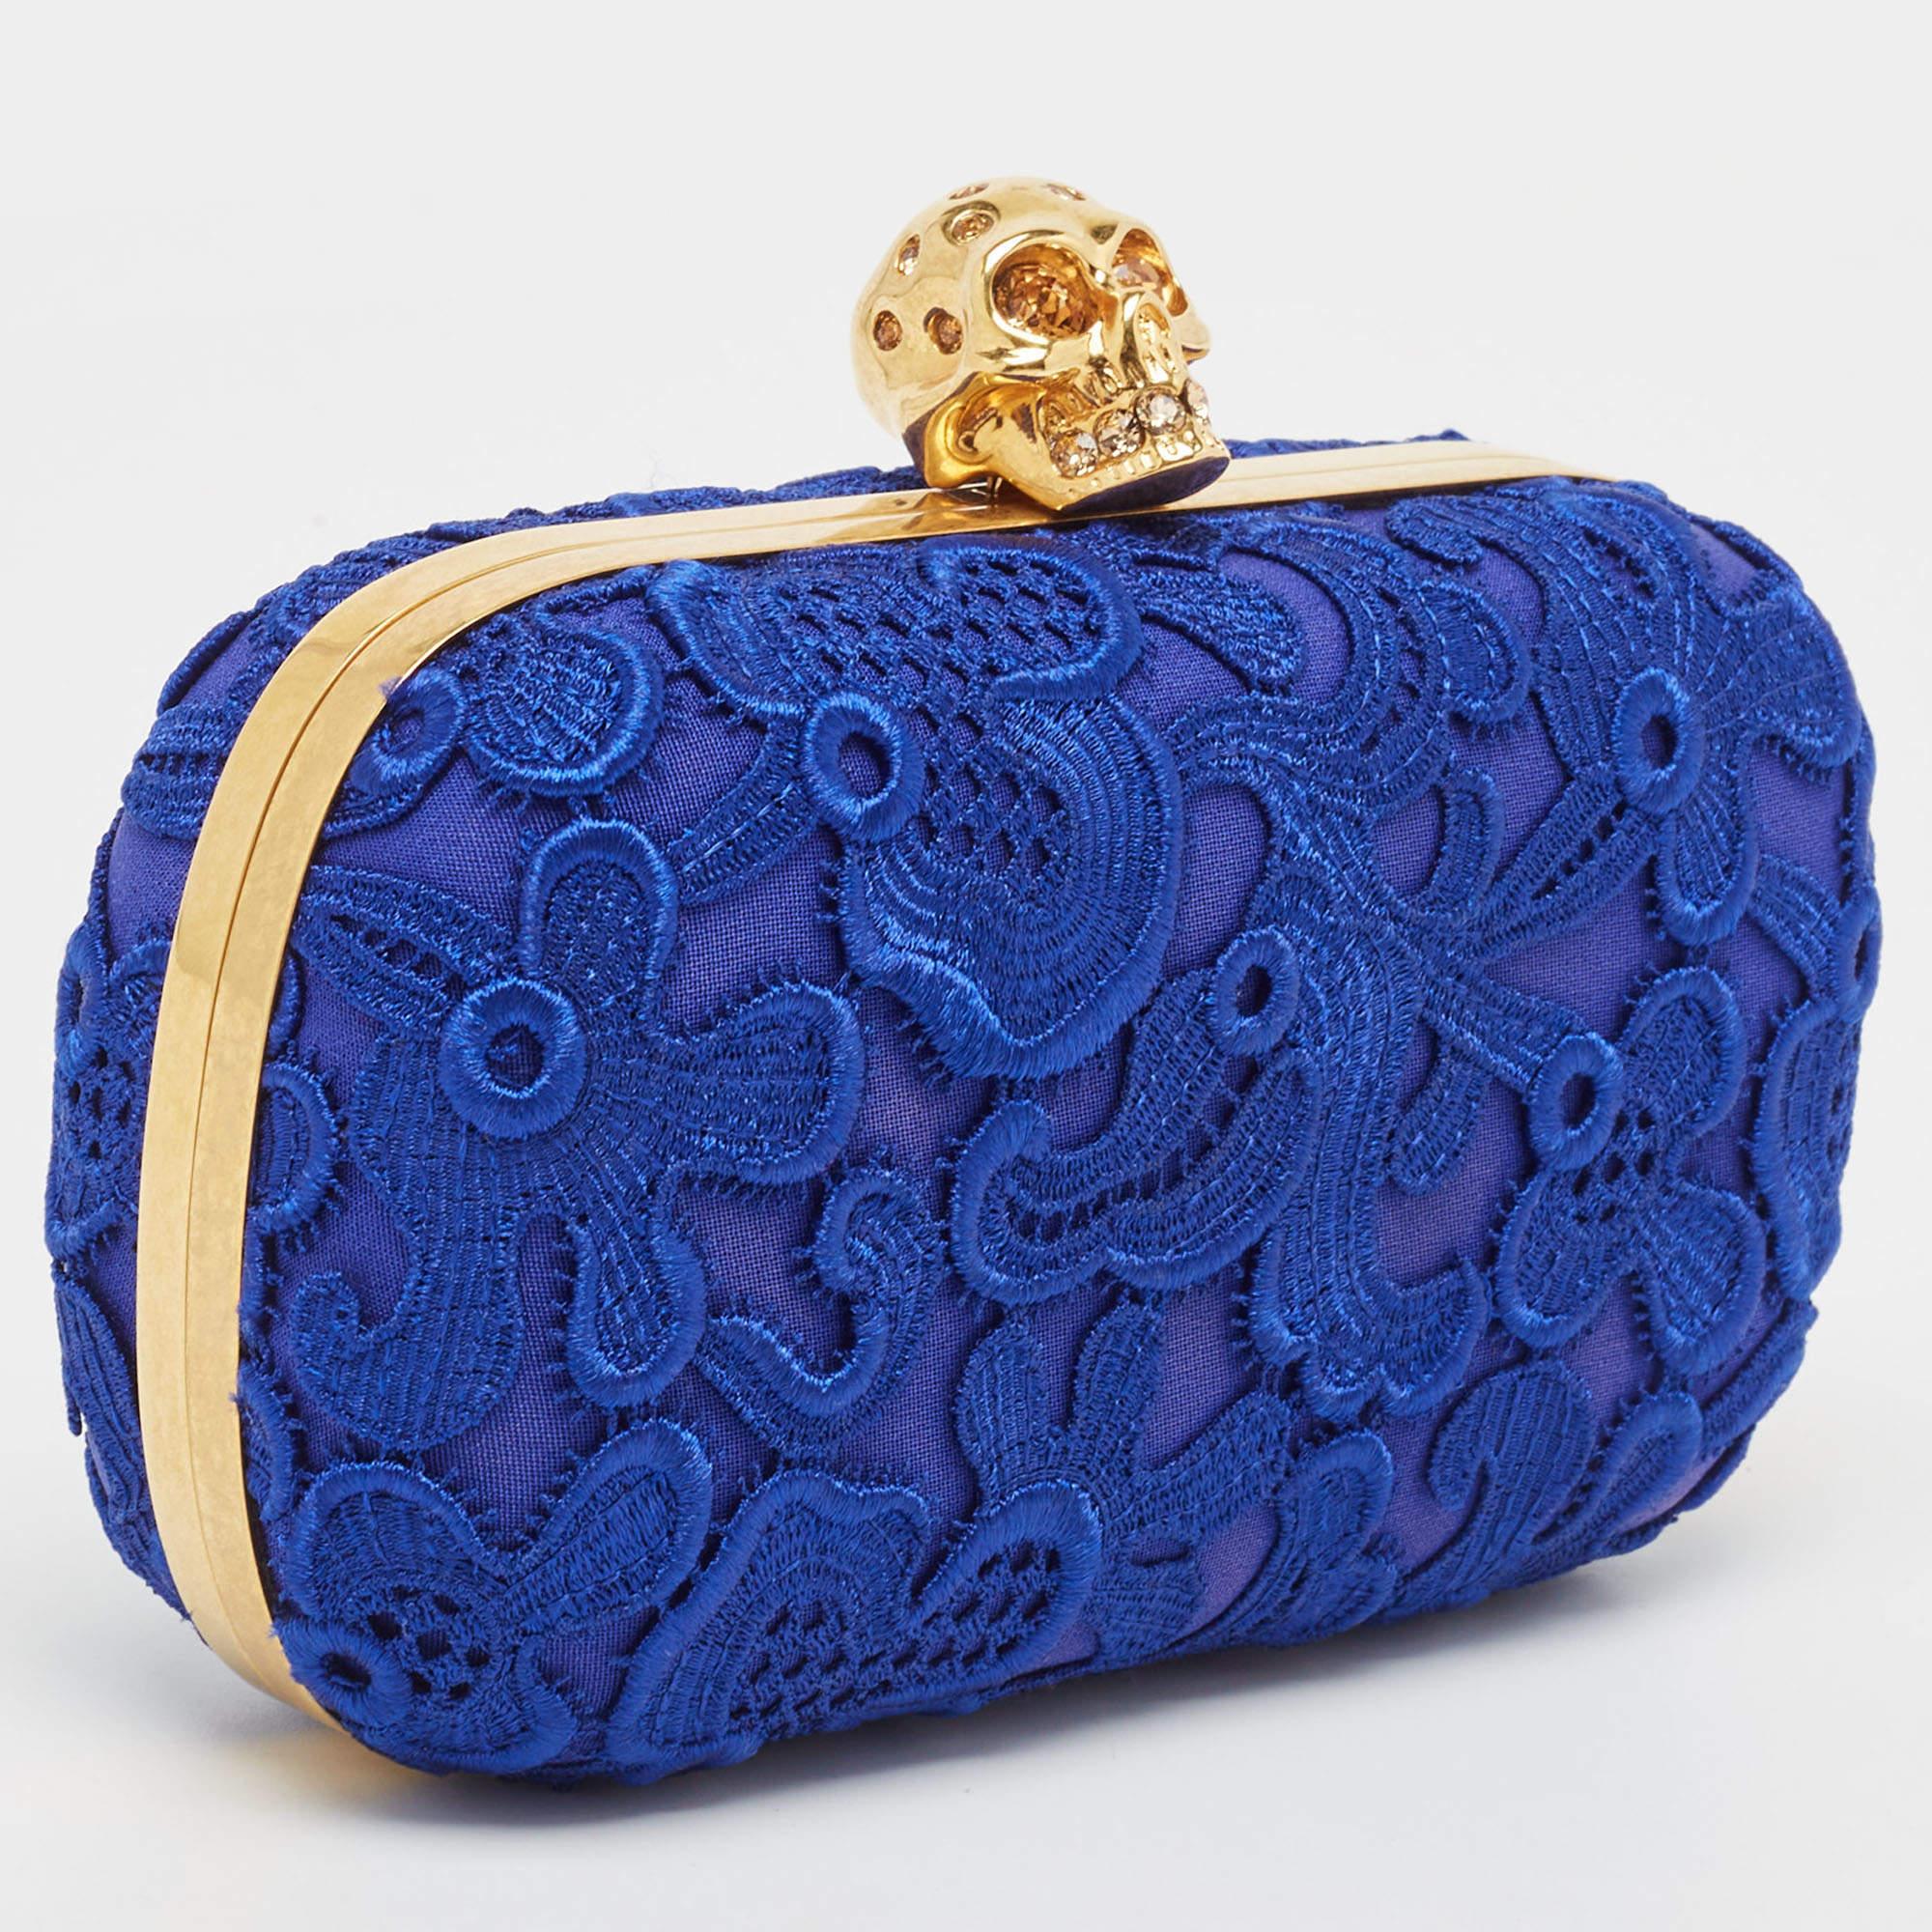 Alexander McQueen Blue Floral Lace Skull Box Clutch For Sale 5